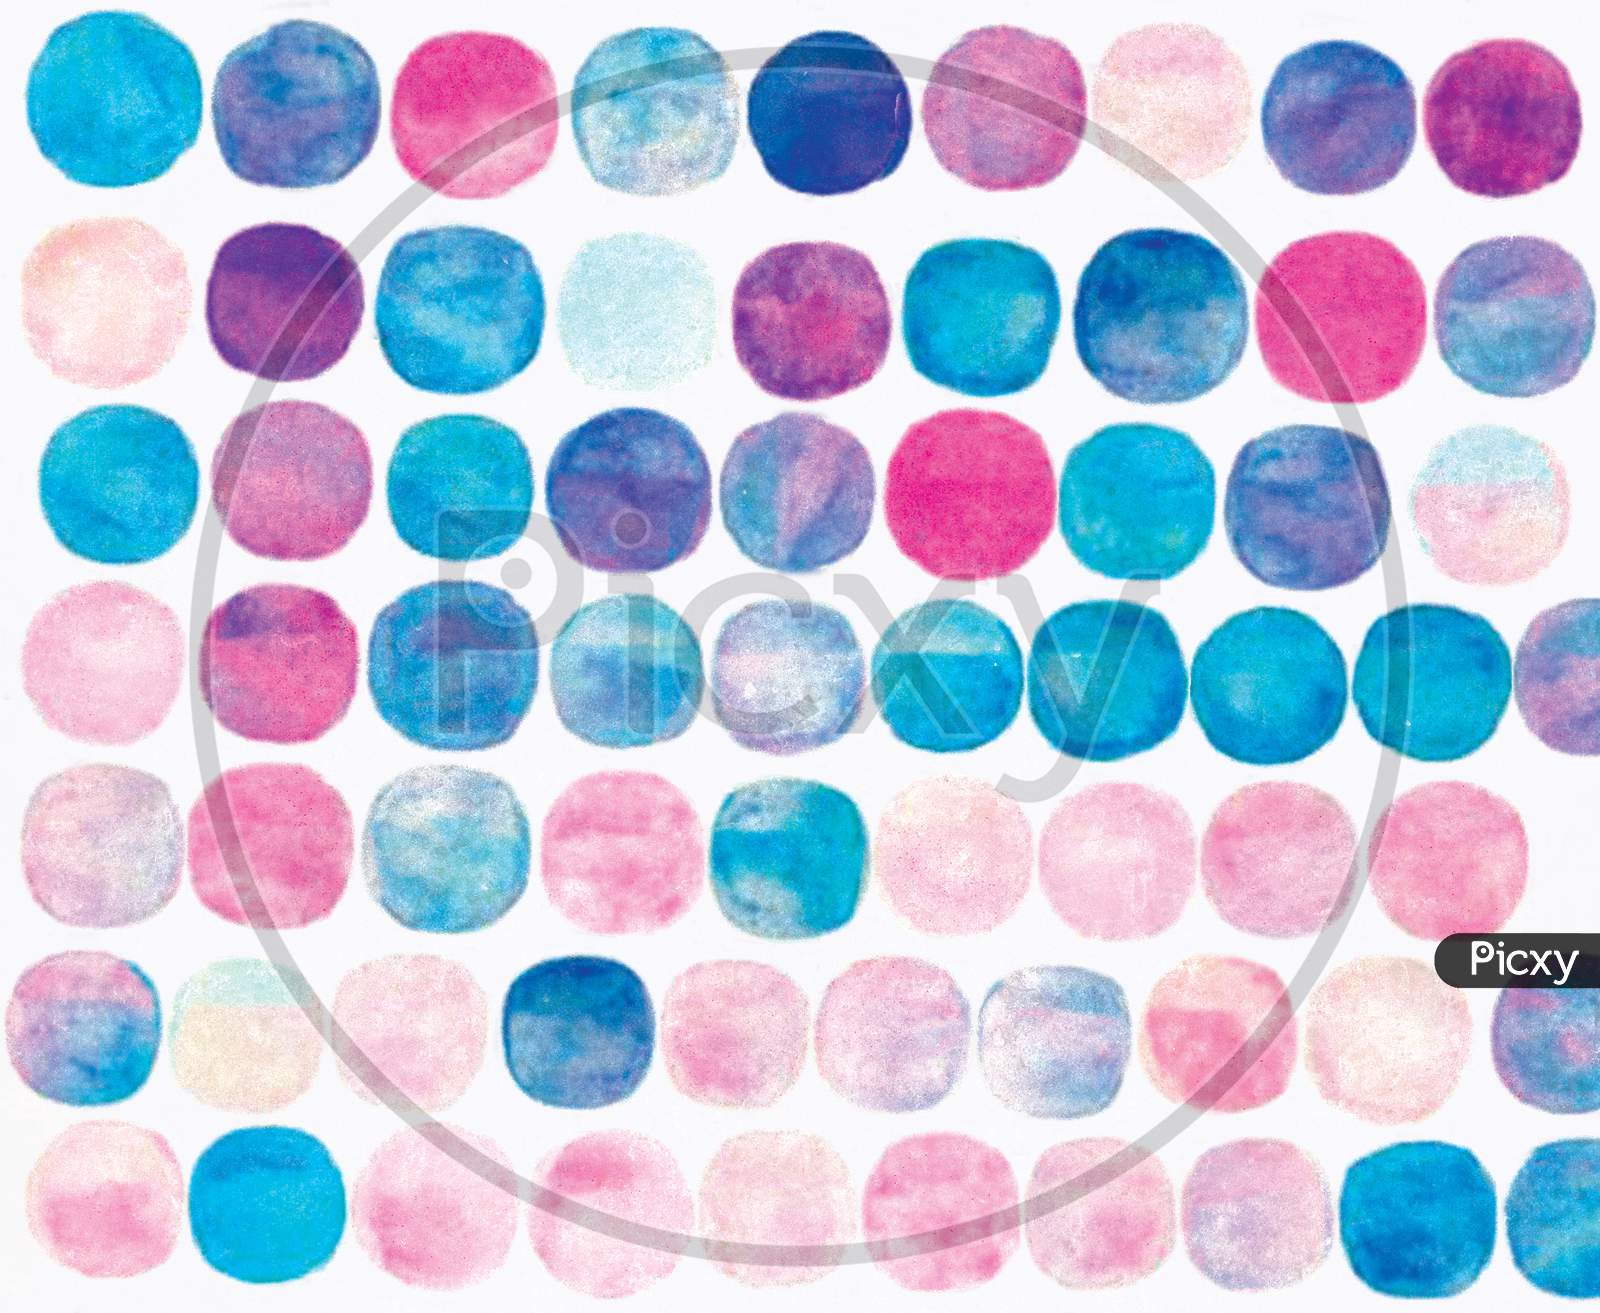 Watercolor Circles On White Background.